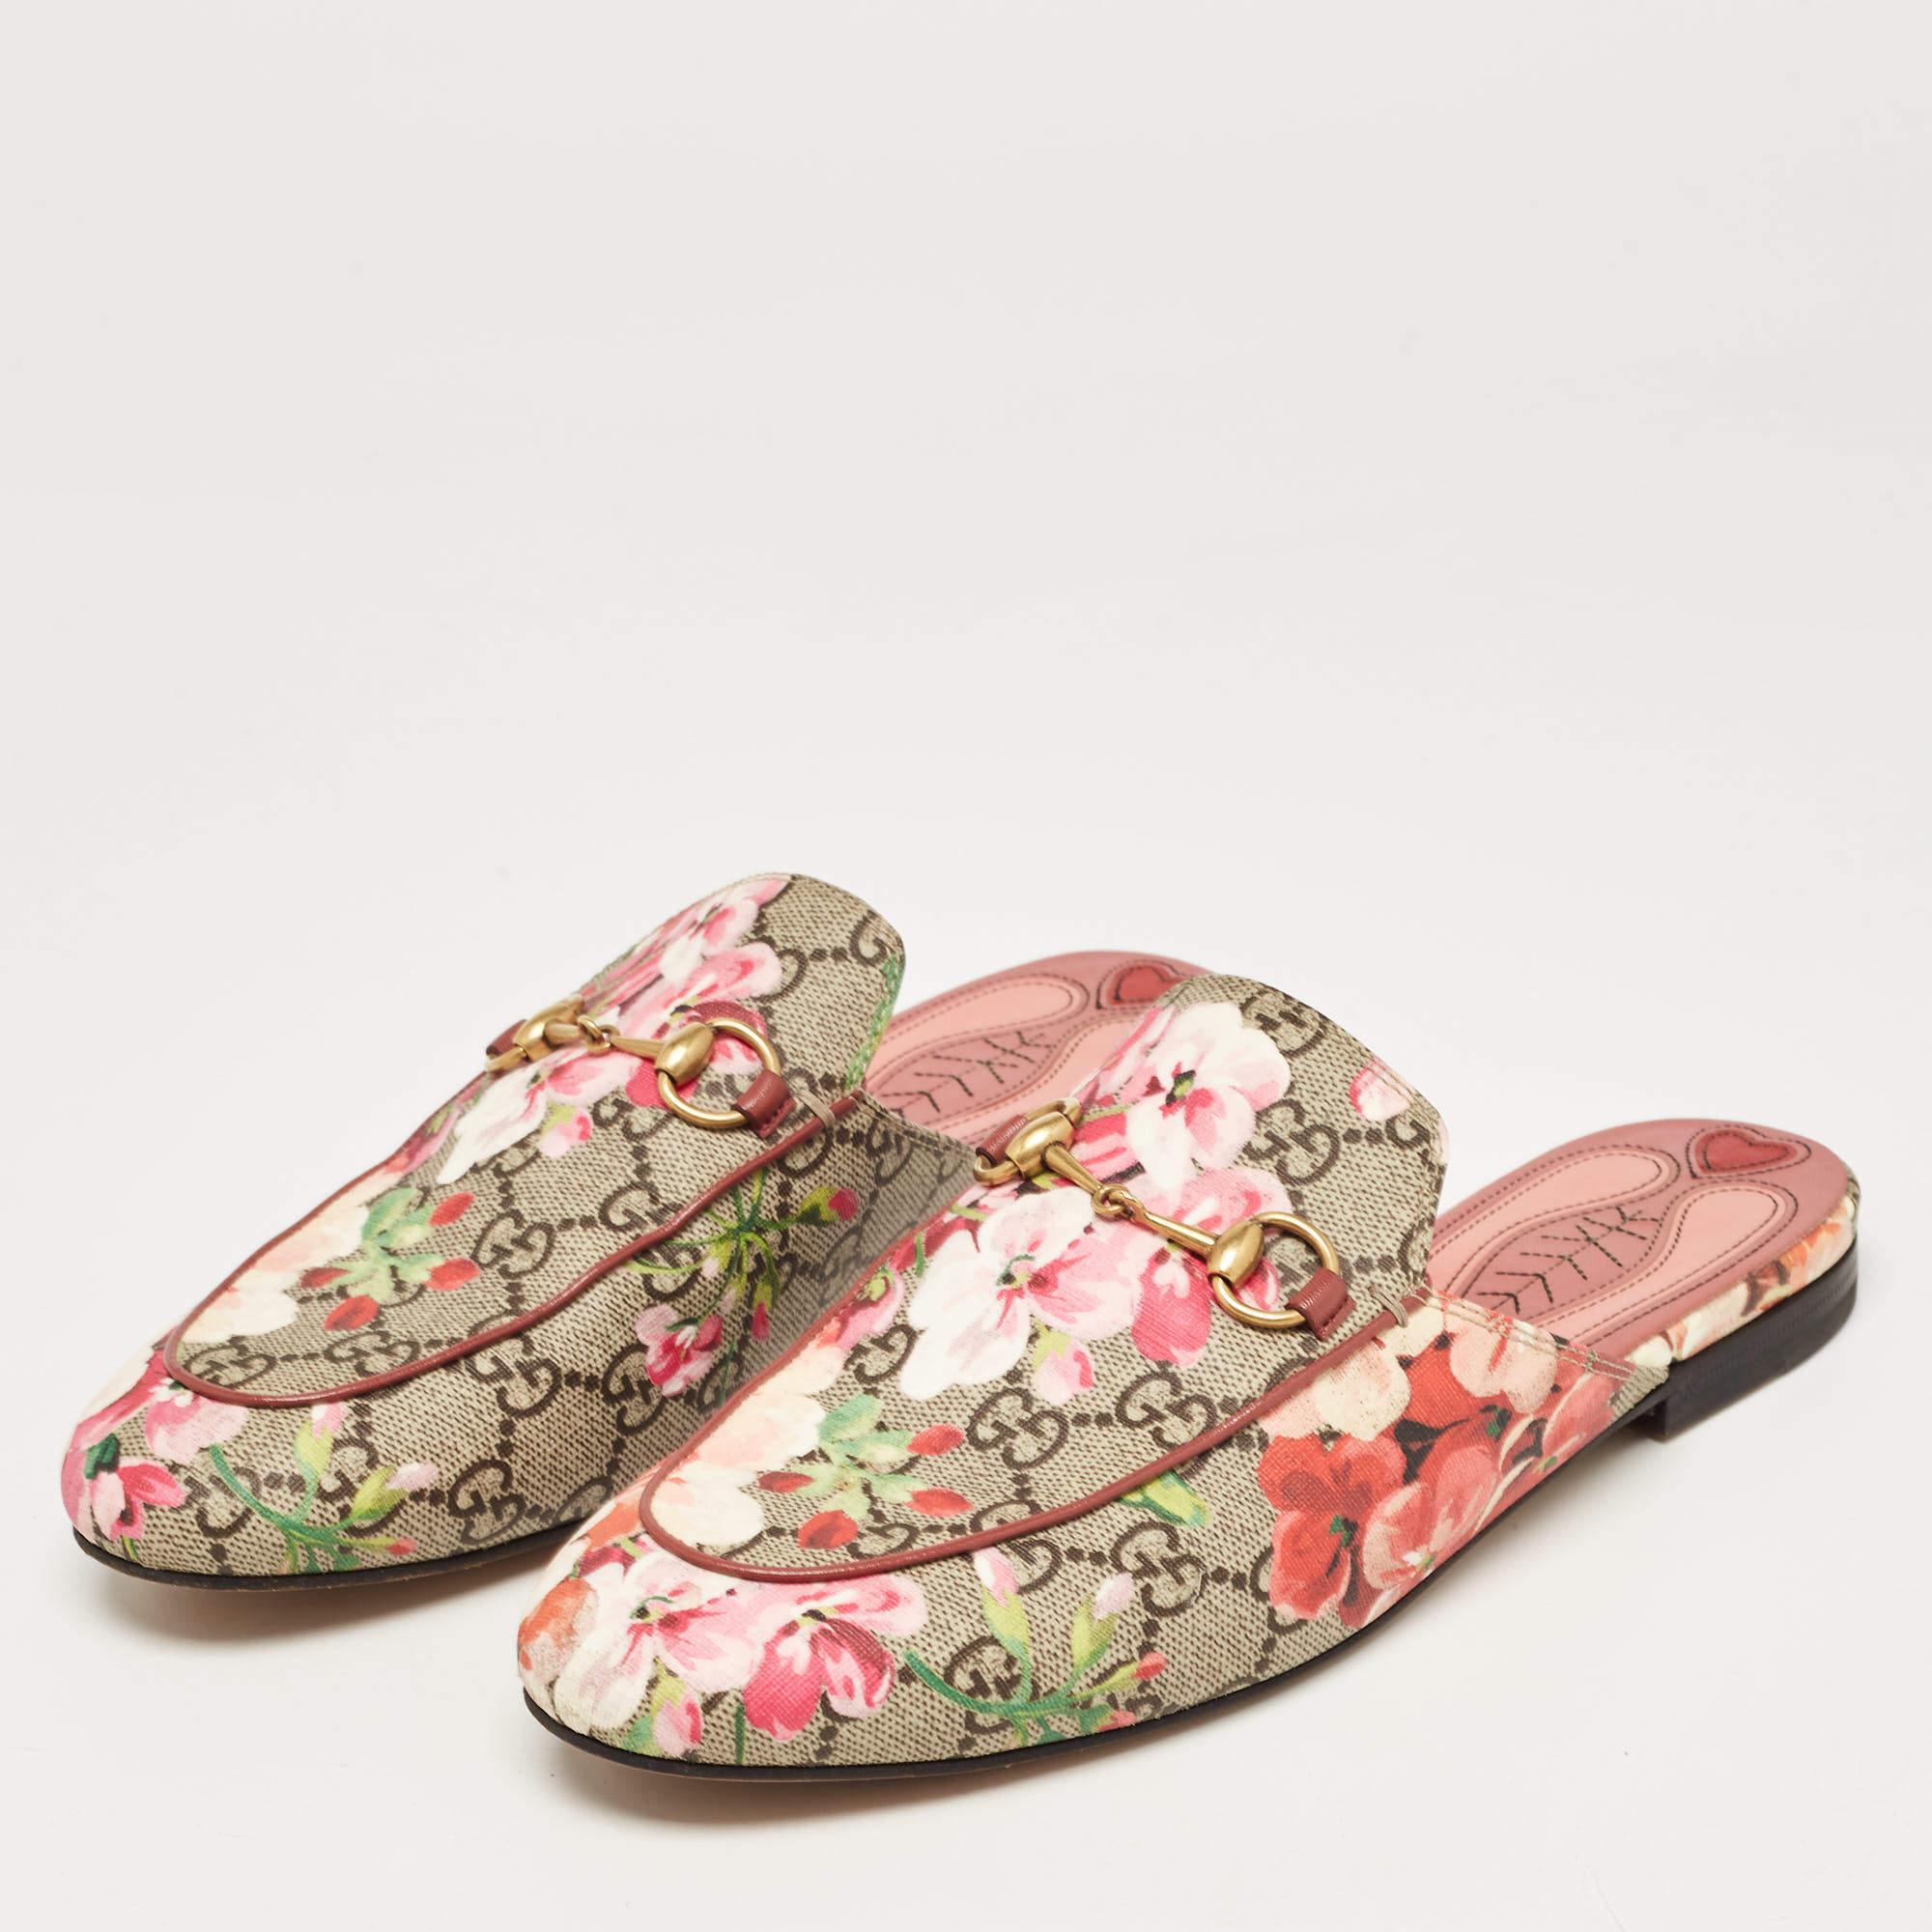 These Gucci Princetown mules signify luxury and practicality. An ultimate favorite of style enthusiasts, its silhouette has the luxe touch of the Horsebit motif on the uppers. It comes made from GG canvas in Blooms print.

